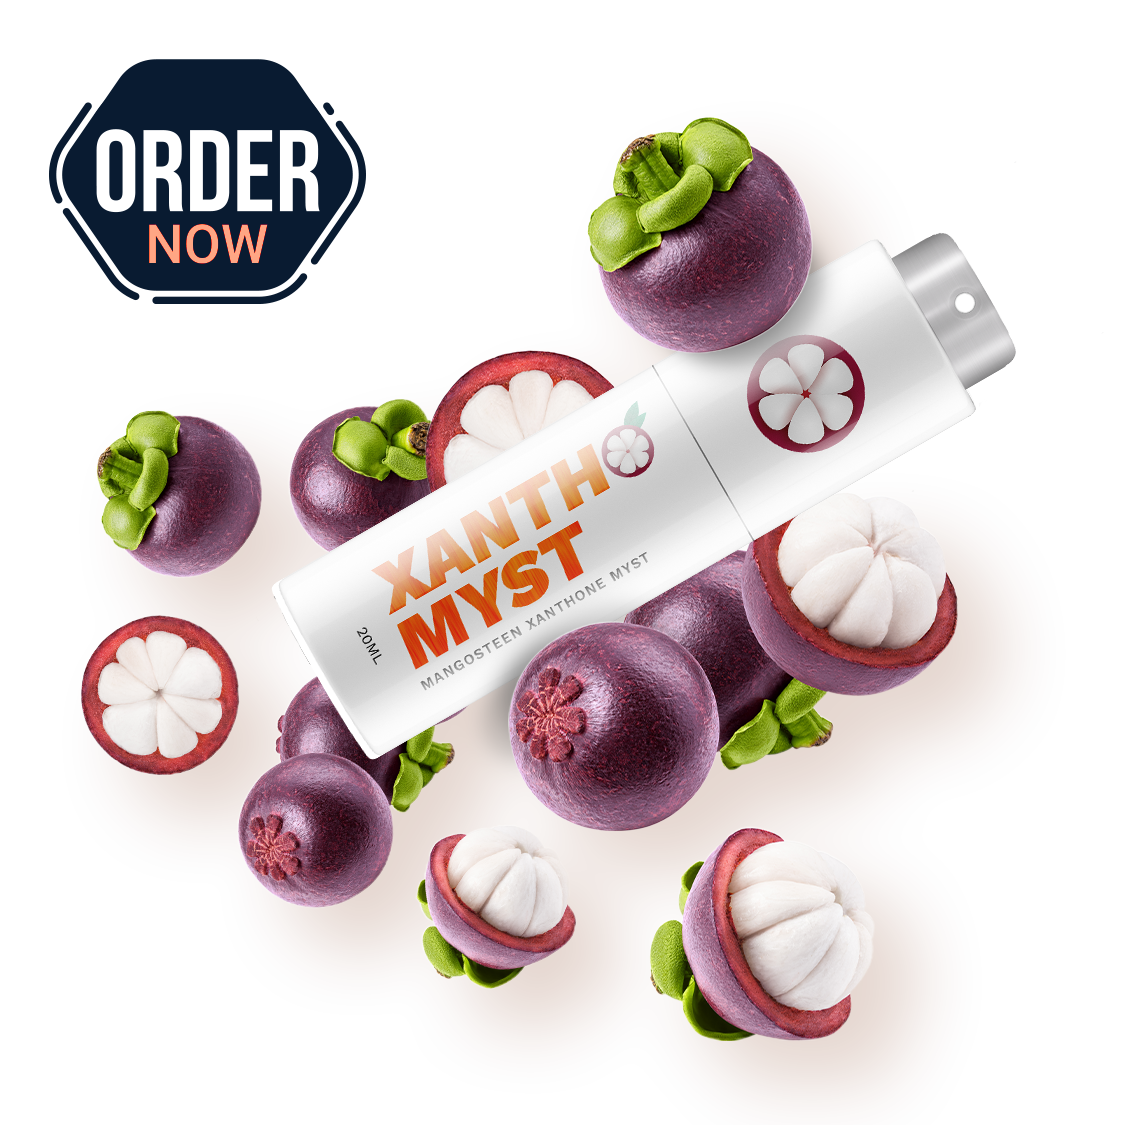 Mangosteen based product called Xanthomyst Chico CA